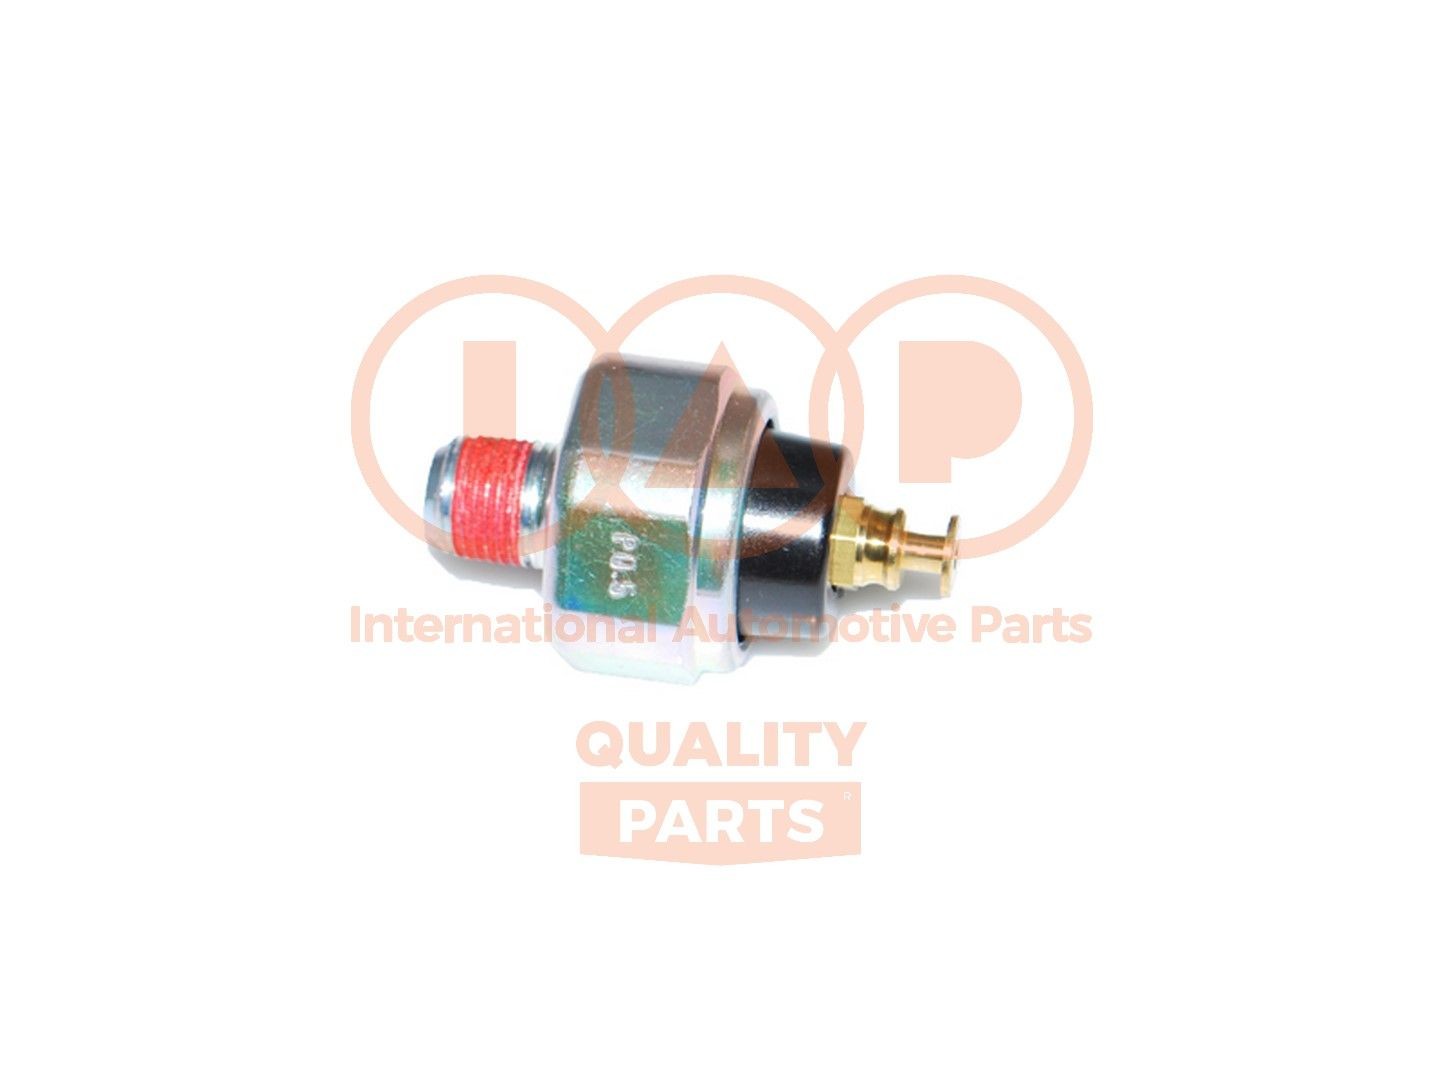 IAP QUALITY PARTS 840-17050 Oil Pressure Switch 83530-30050